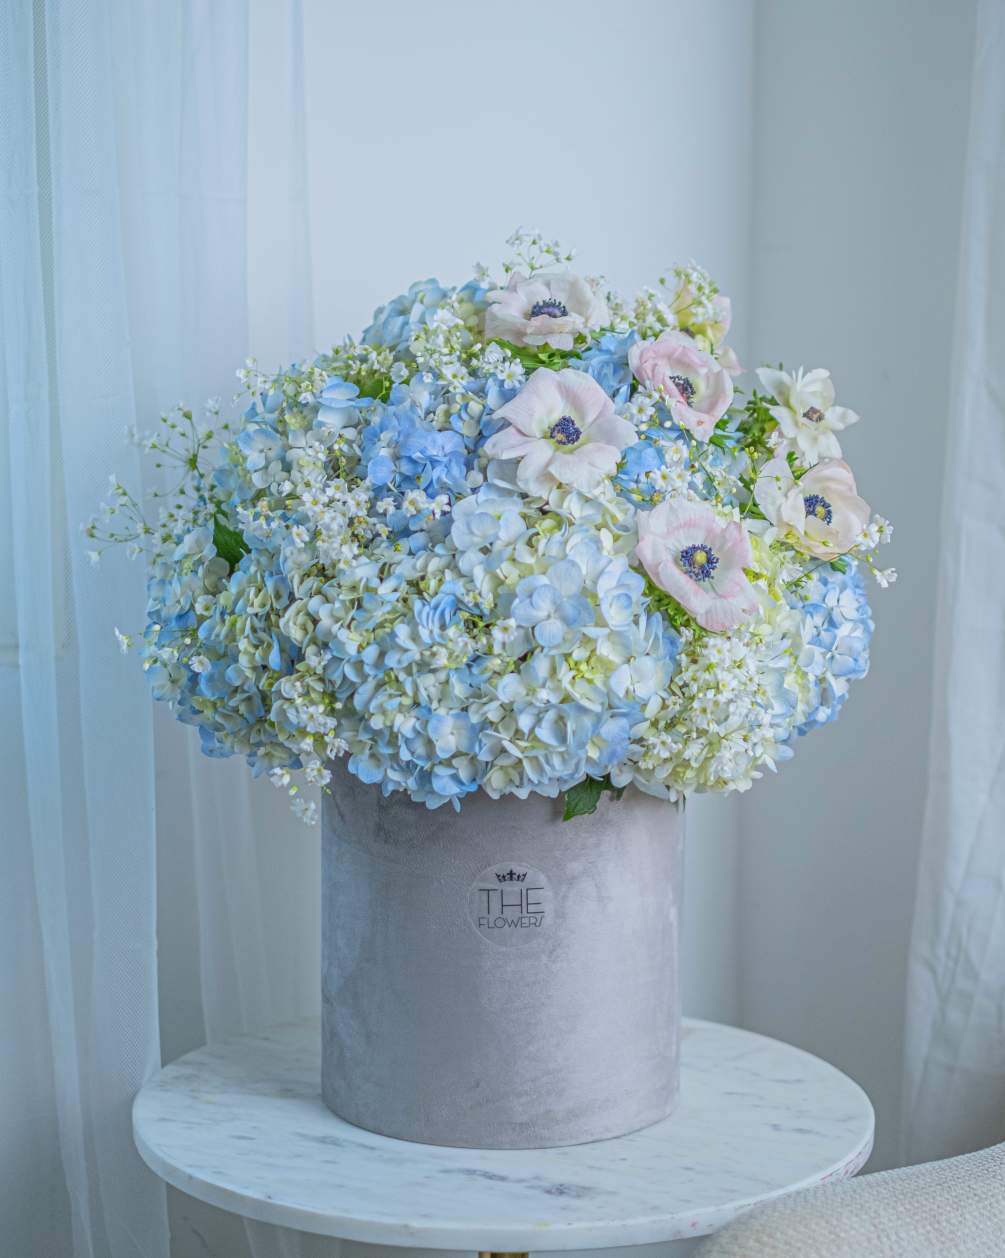 The Ecuadorian Hydrangeas used in our bouquets are fluffy, cloud-like fragrant inflorescences